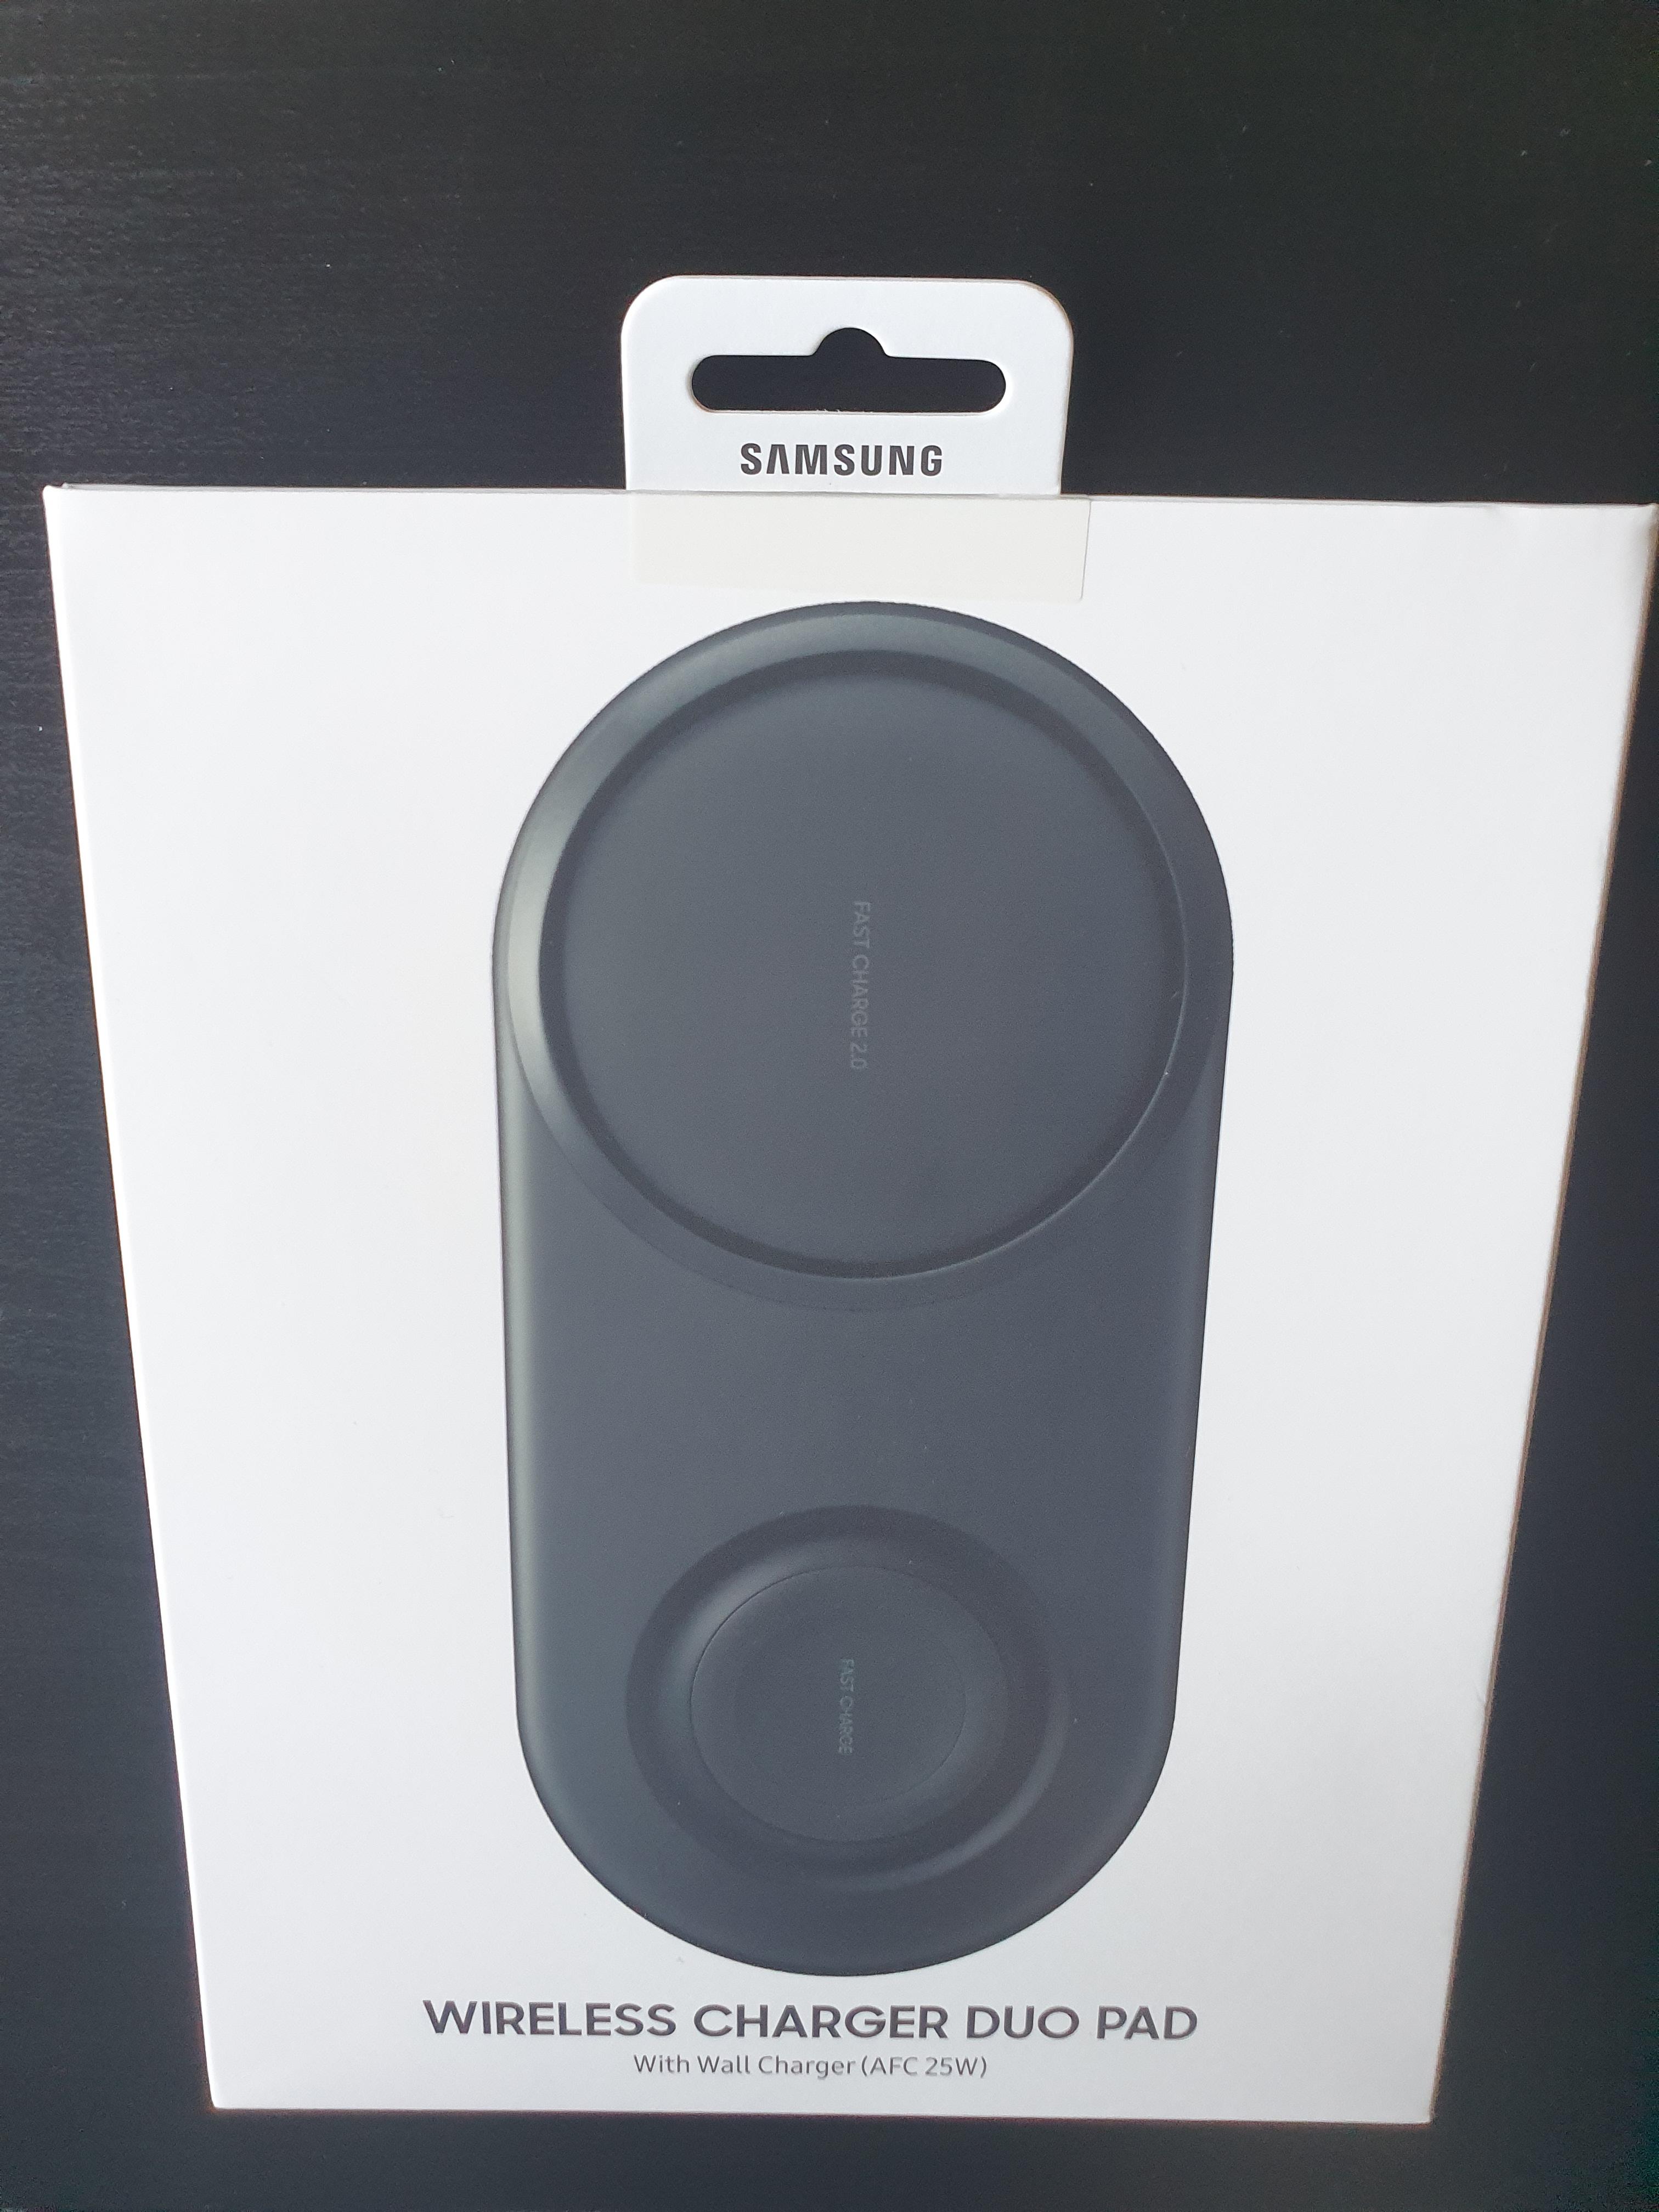 Samsung Wireless Charger Duo Pack $ 29,21 USD